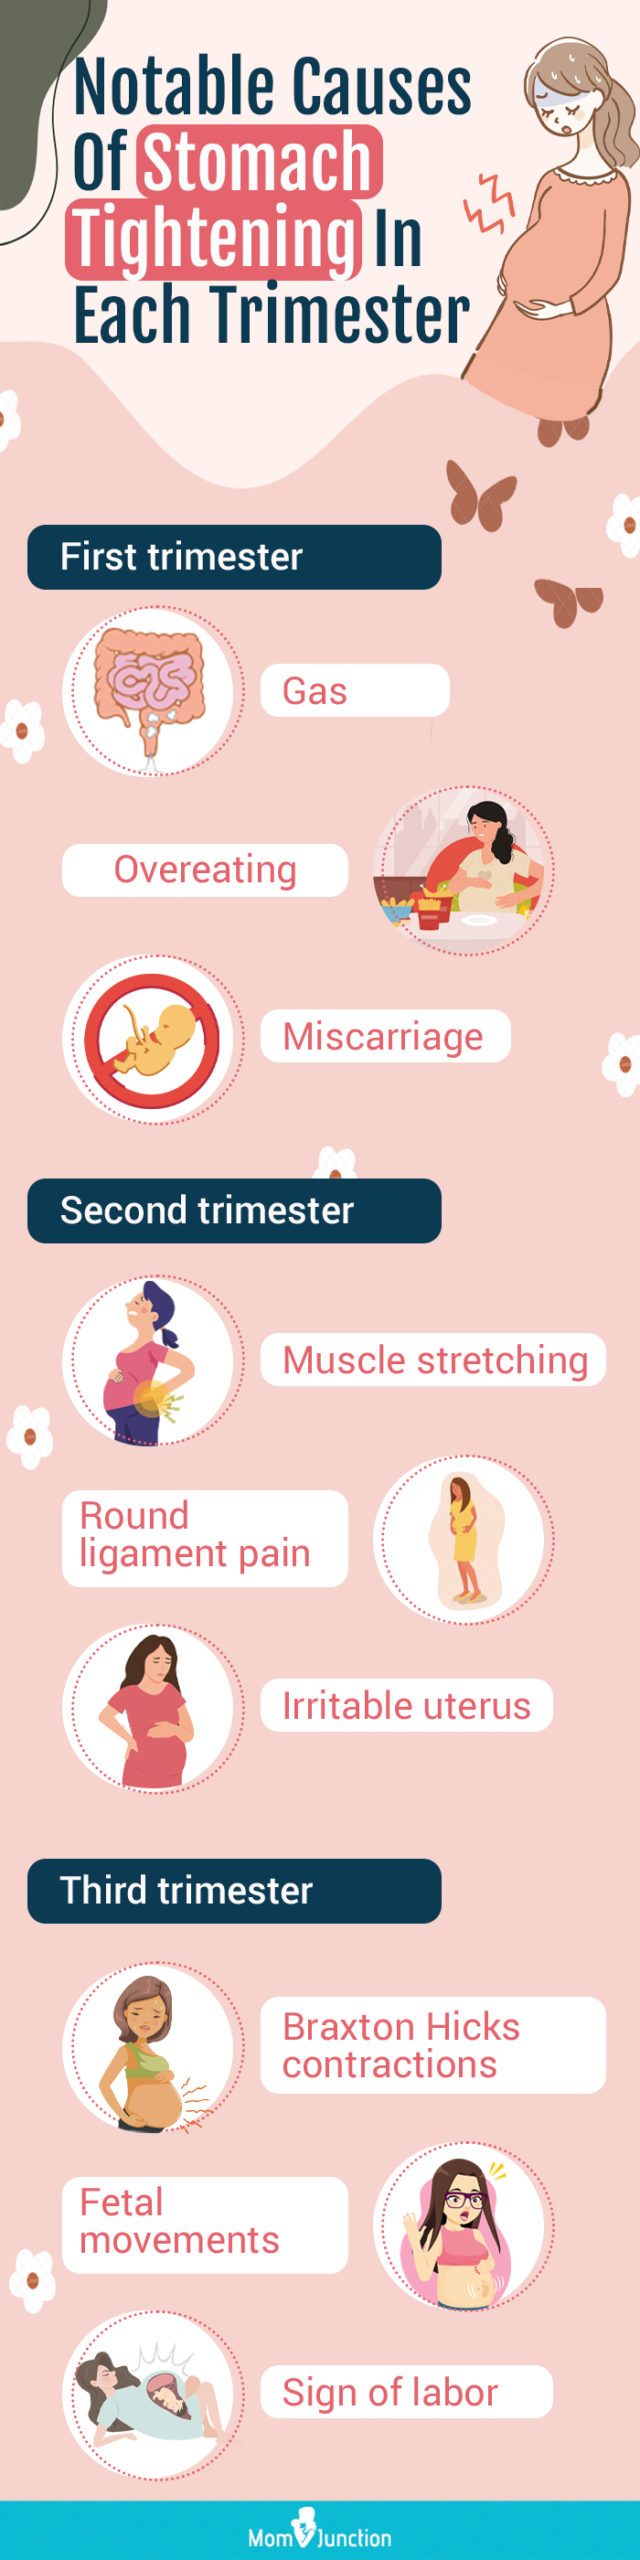 notable causes of stomach tightening in each trimester (infographic)